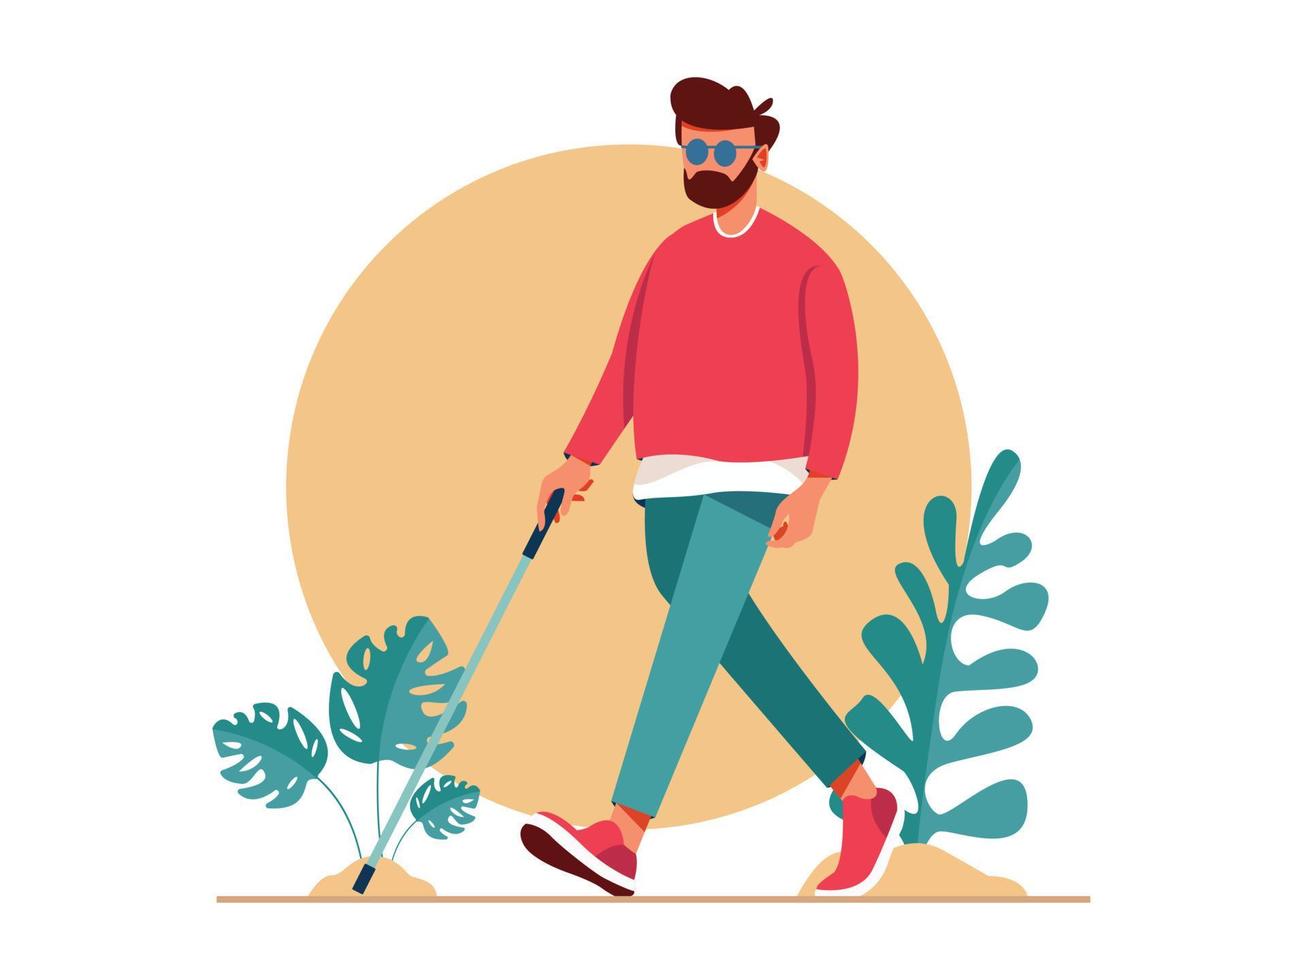 Blind Man Walking with Stick. Disabled people living active life vector